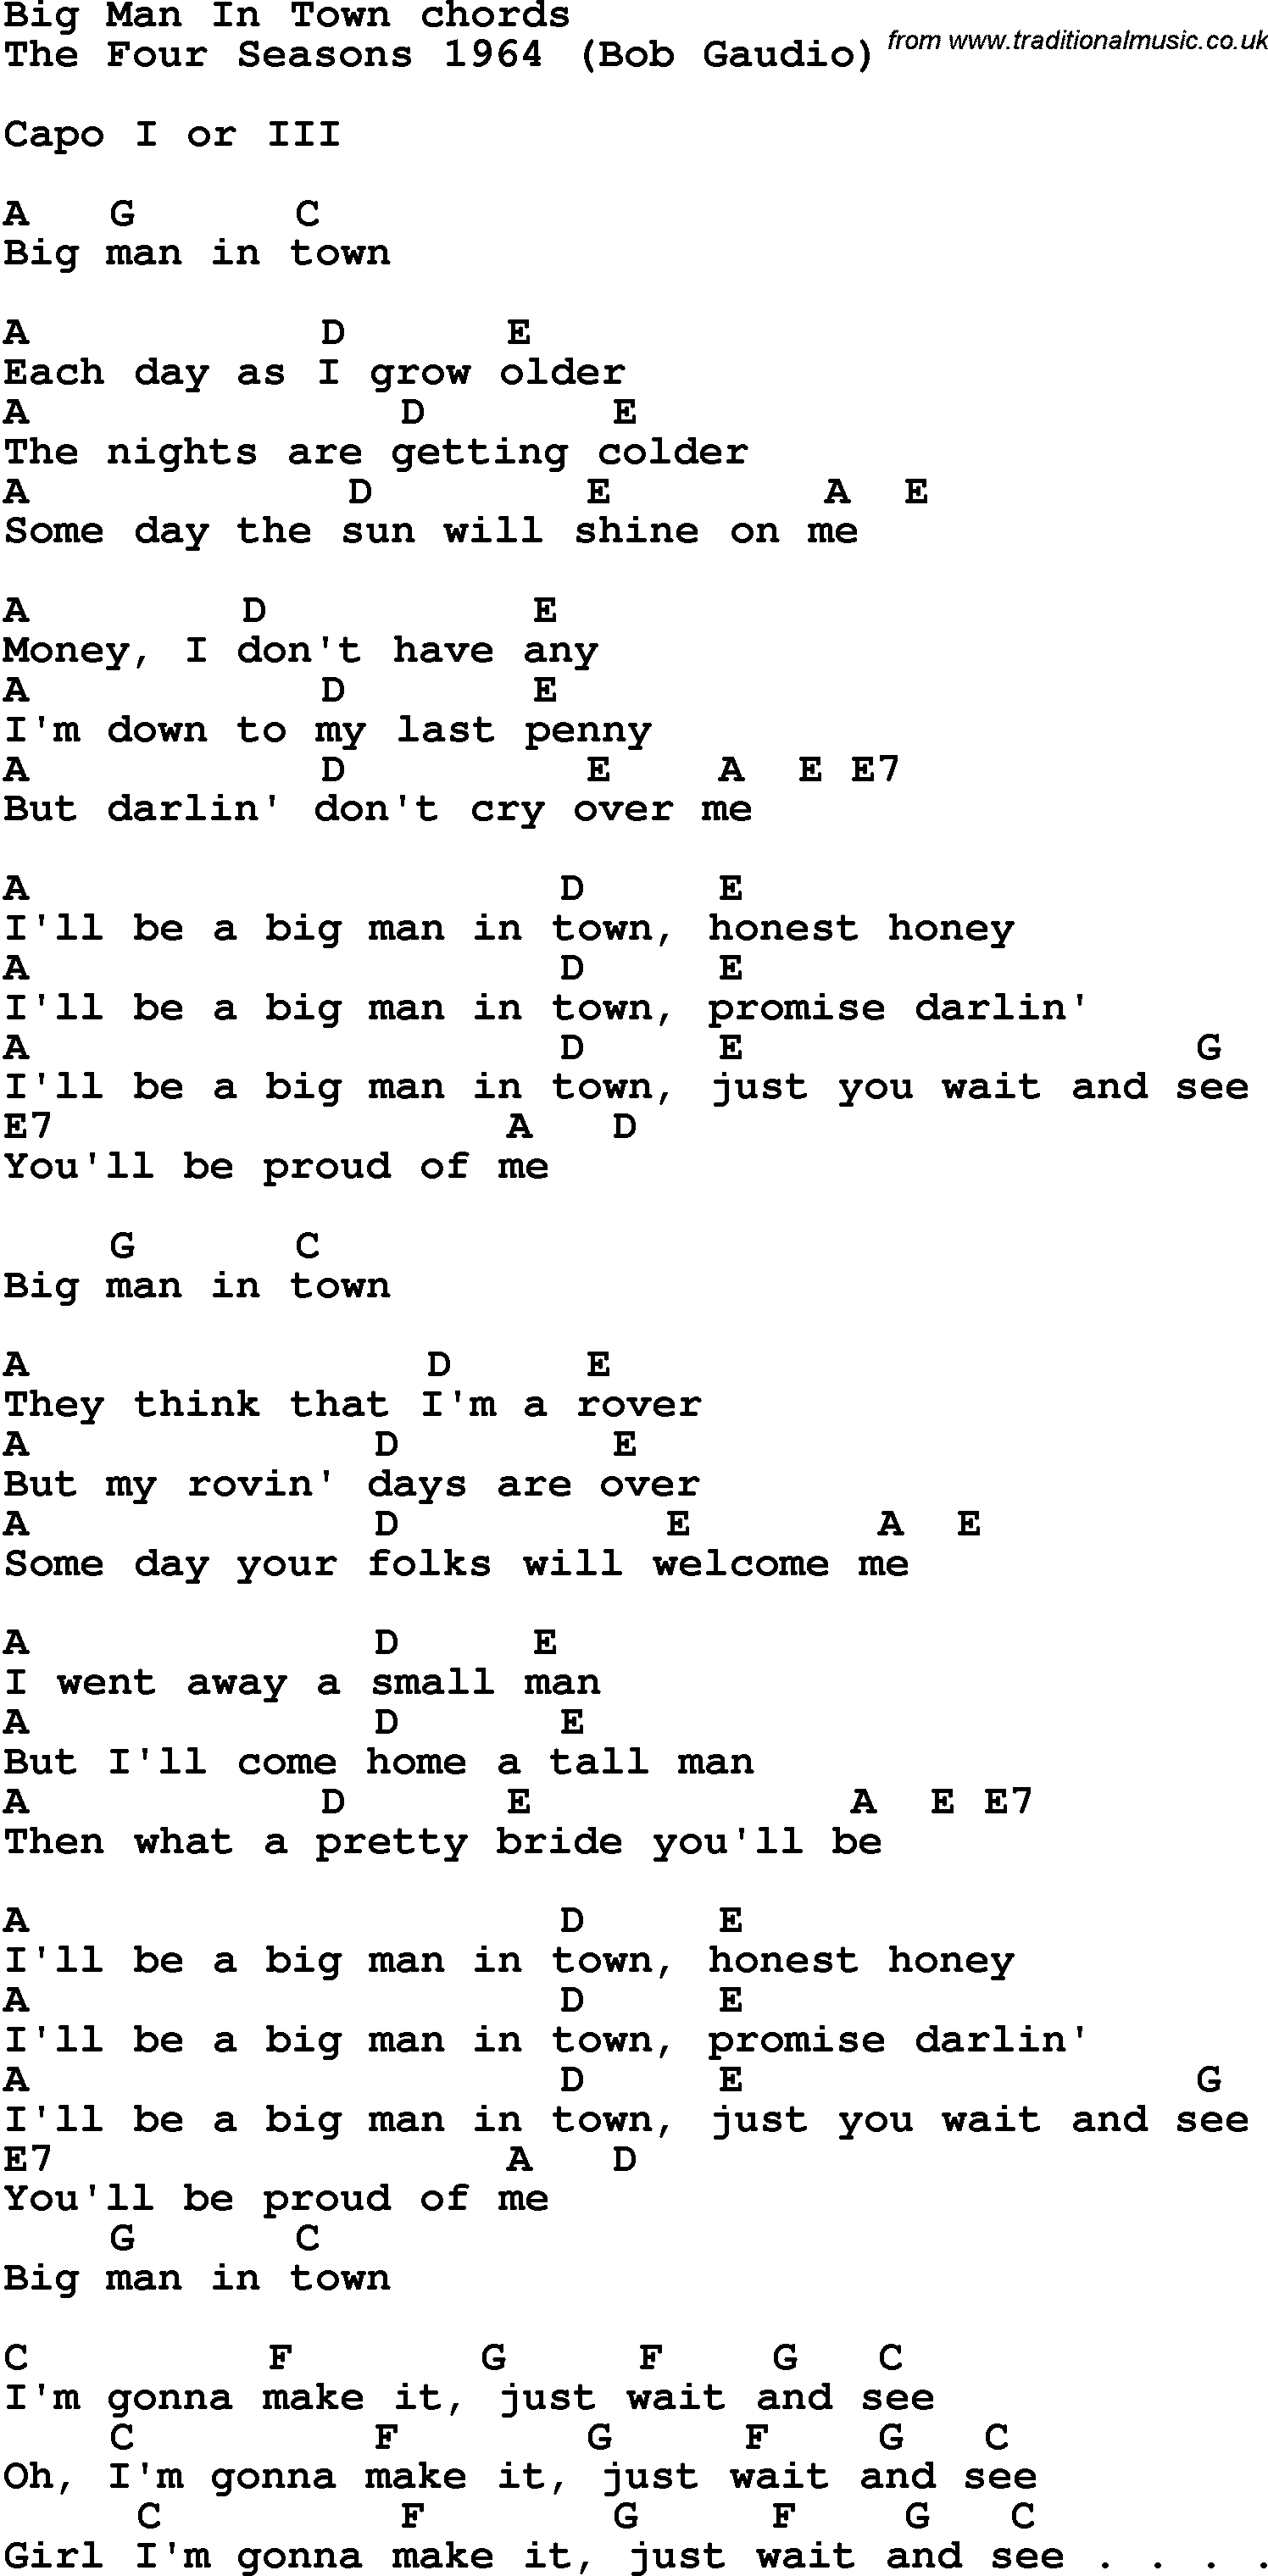 Song Lyrics with guitar chords for Big Man In Town